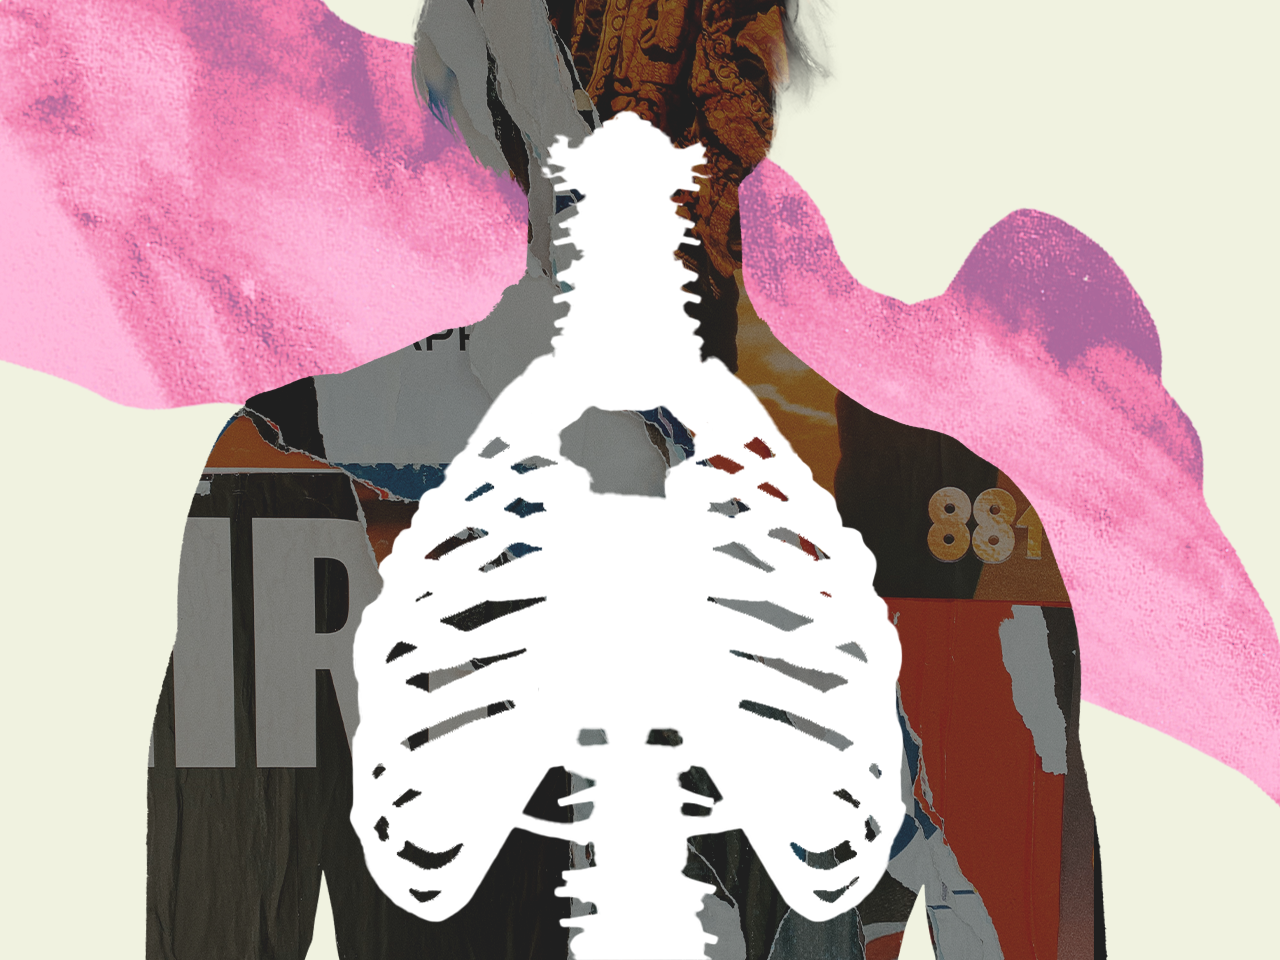 An illustrative collage showing a silhouette of lungs